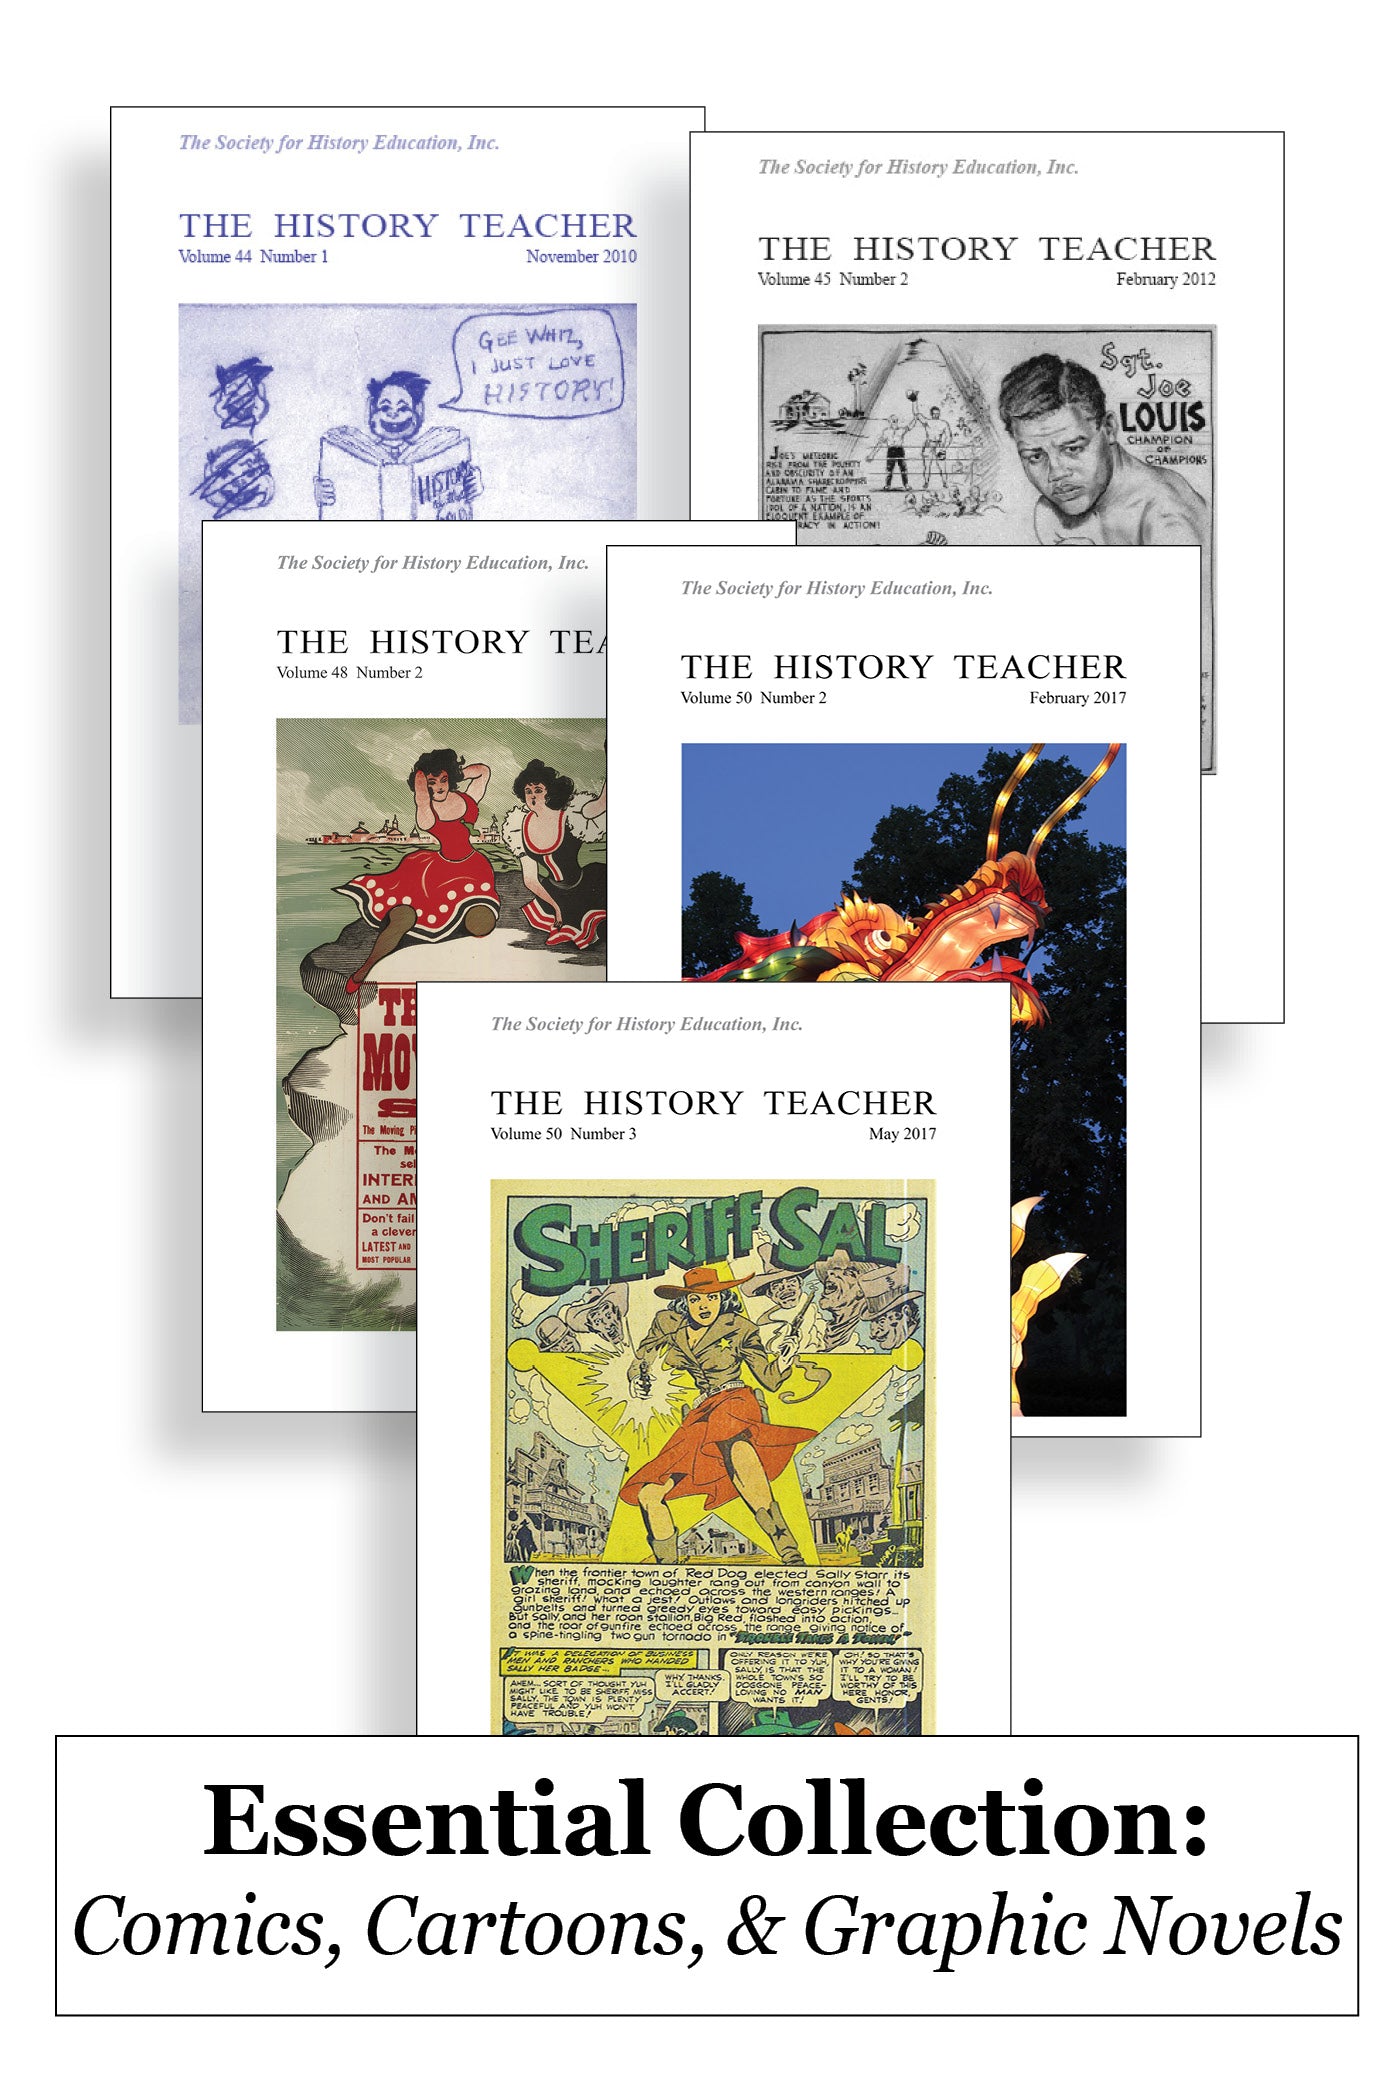 Essential Collection - Comics, Cartoons, and Graphic Novels (5 Issues + Free Reprint)